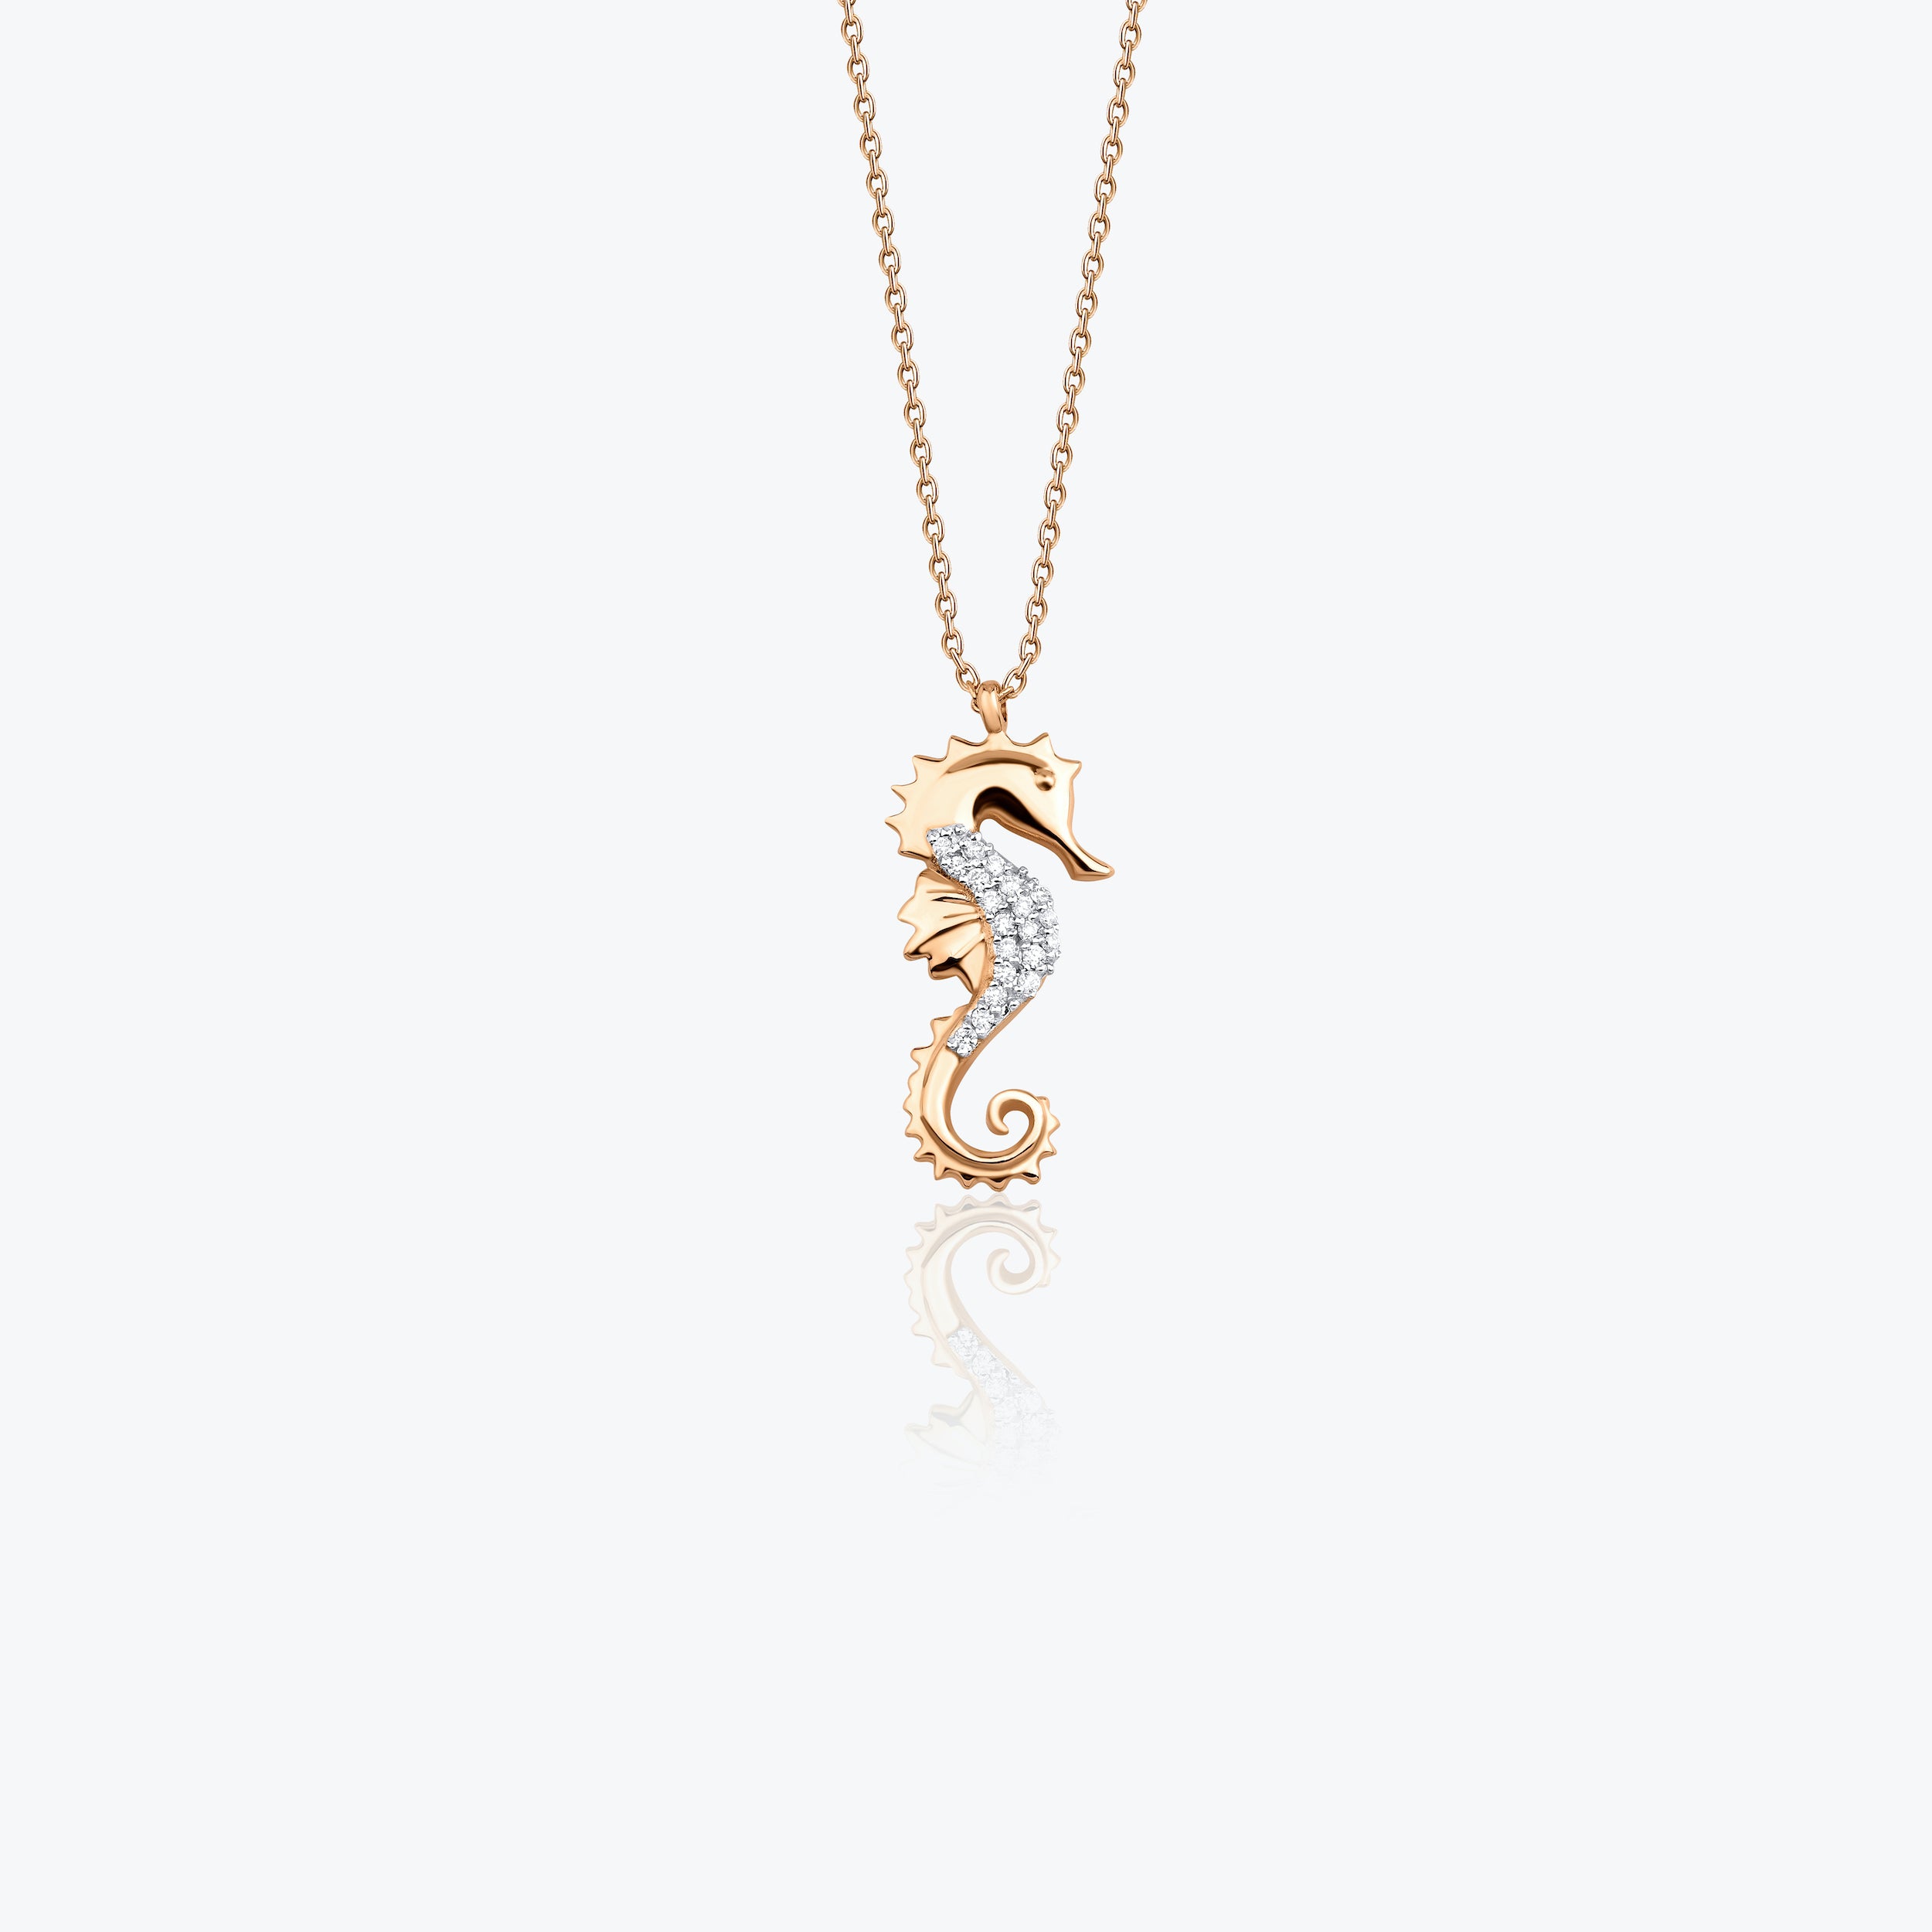 Diamond Seahorse Pendant Necklace in 14K and 18K Gold